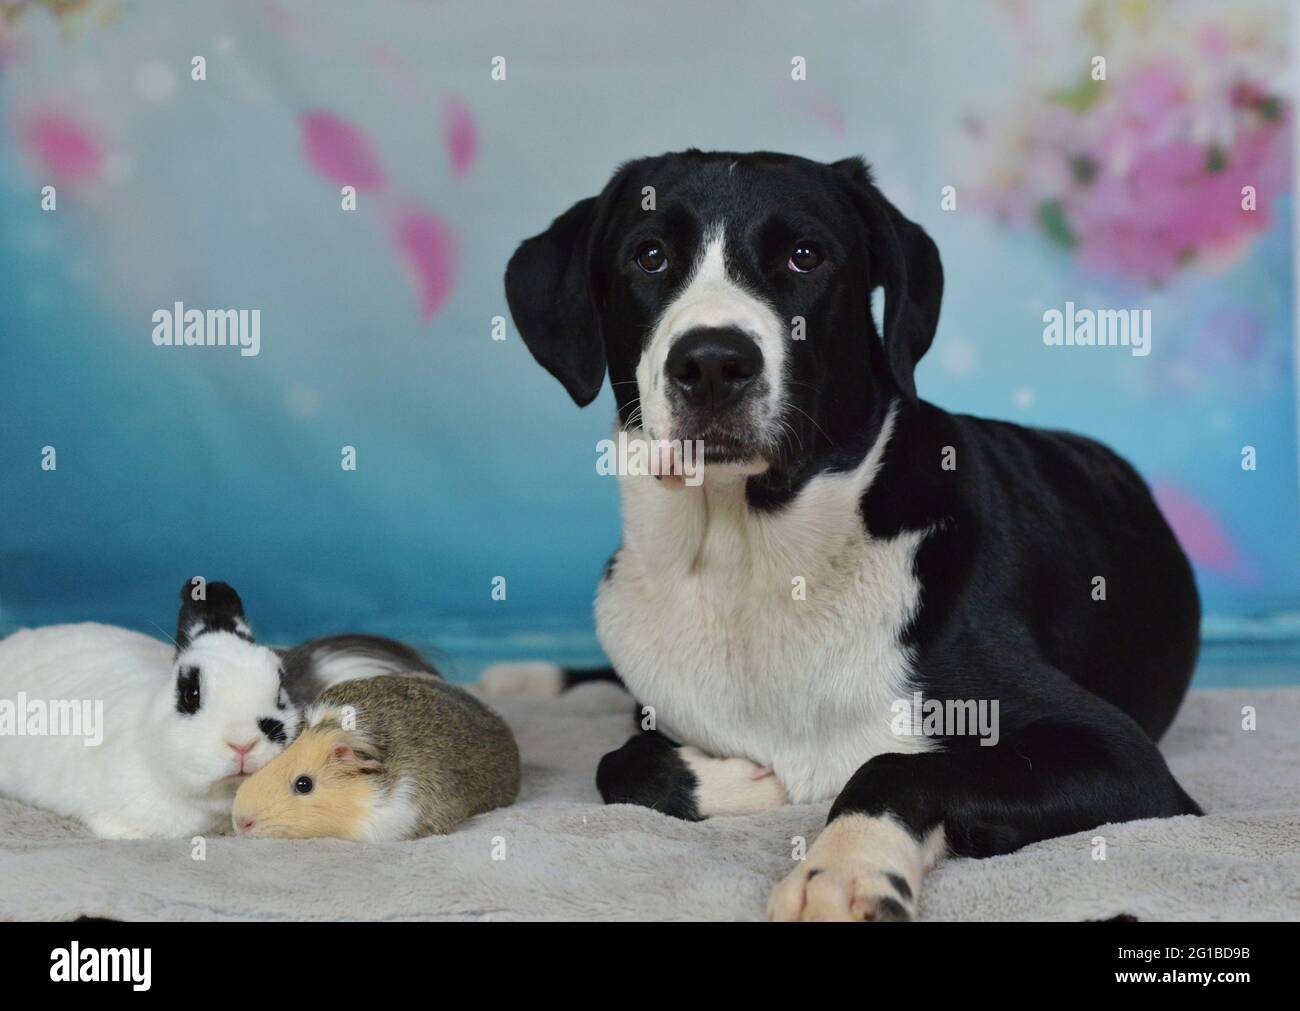 Dog, rabbit and guinea pig lie together on a blanket Stock Photo